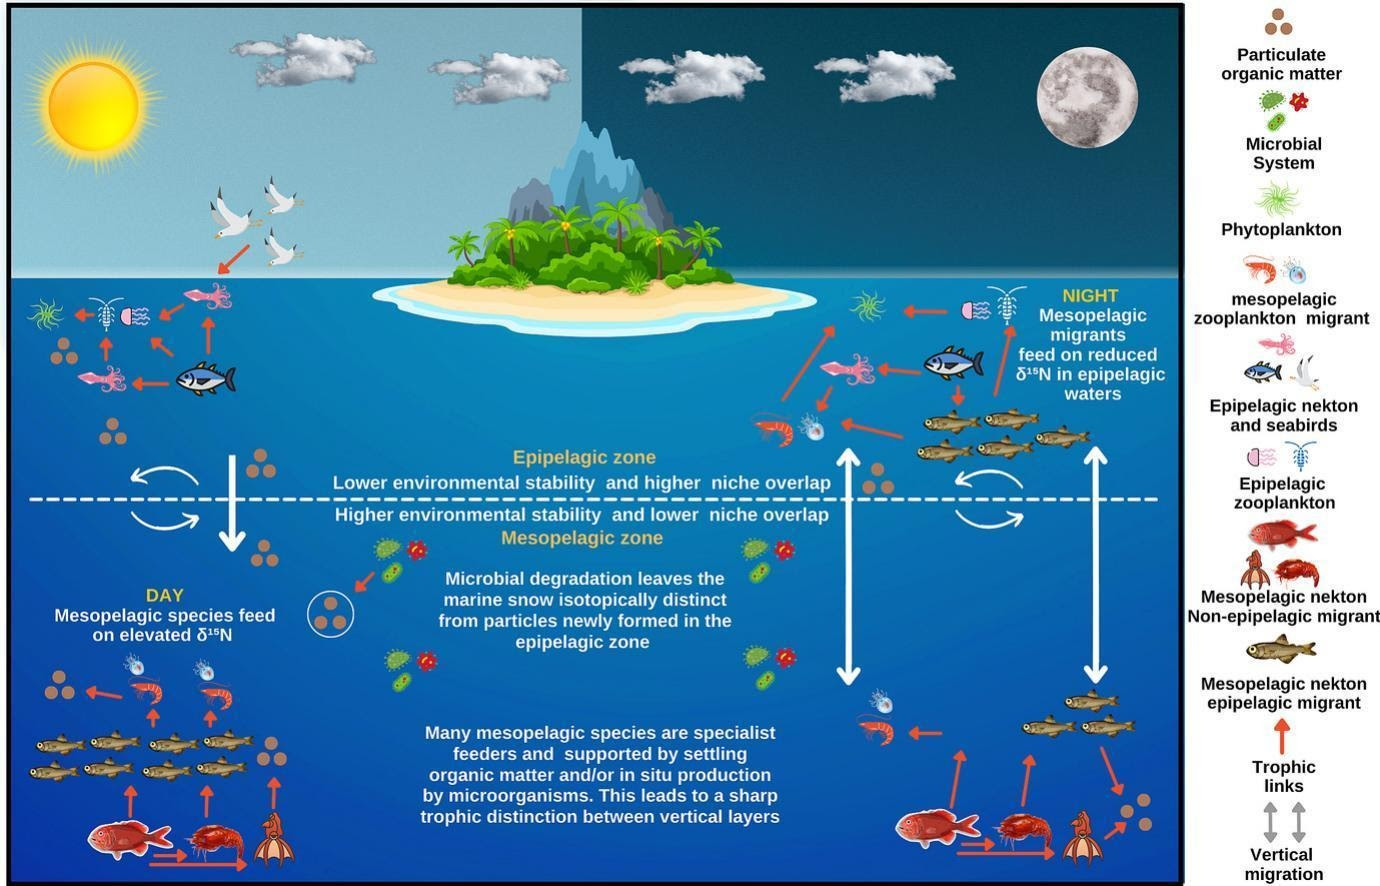 From the light blue sky to the dark deep sea: Trophic and resource partitioning between epipelagic and mesopelagic layers in a tropical oceanic ecosystem